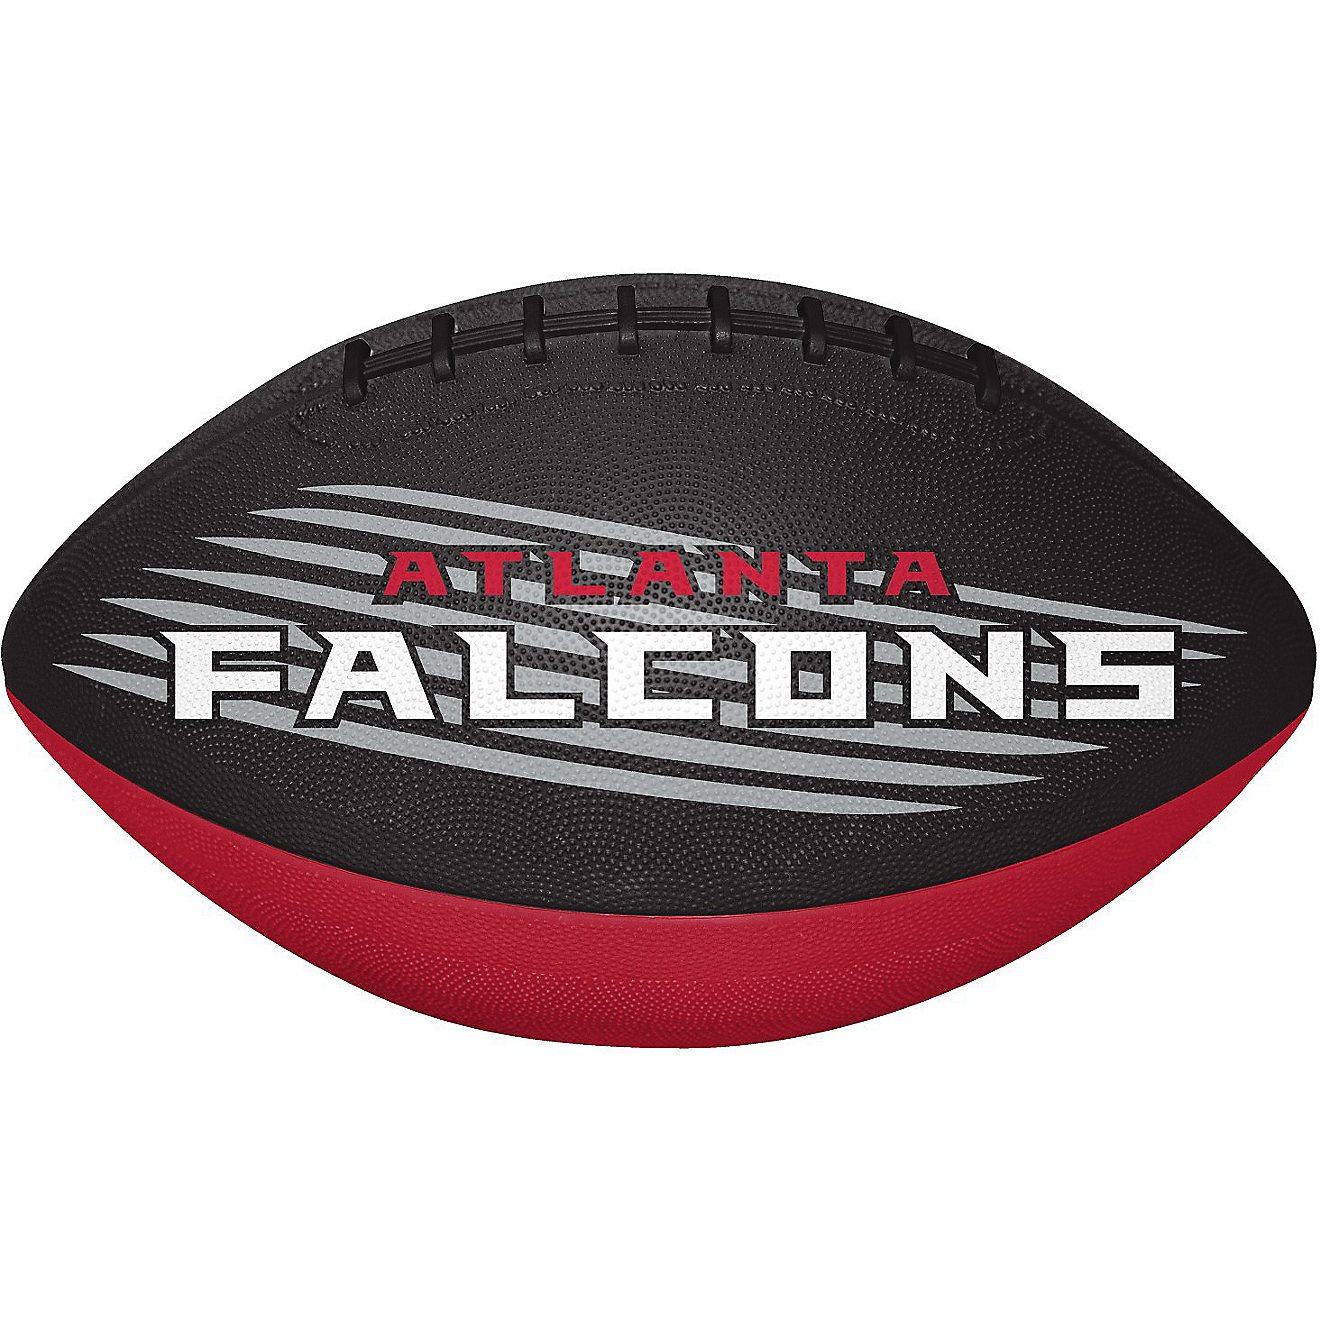 Rawlings Youth Atlanta Falcons Downfield Rubber Football                                                                         - view number 2